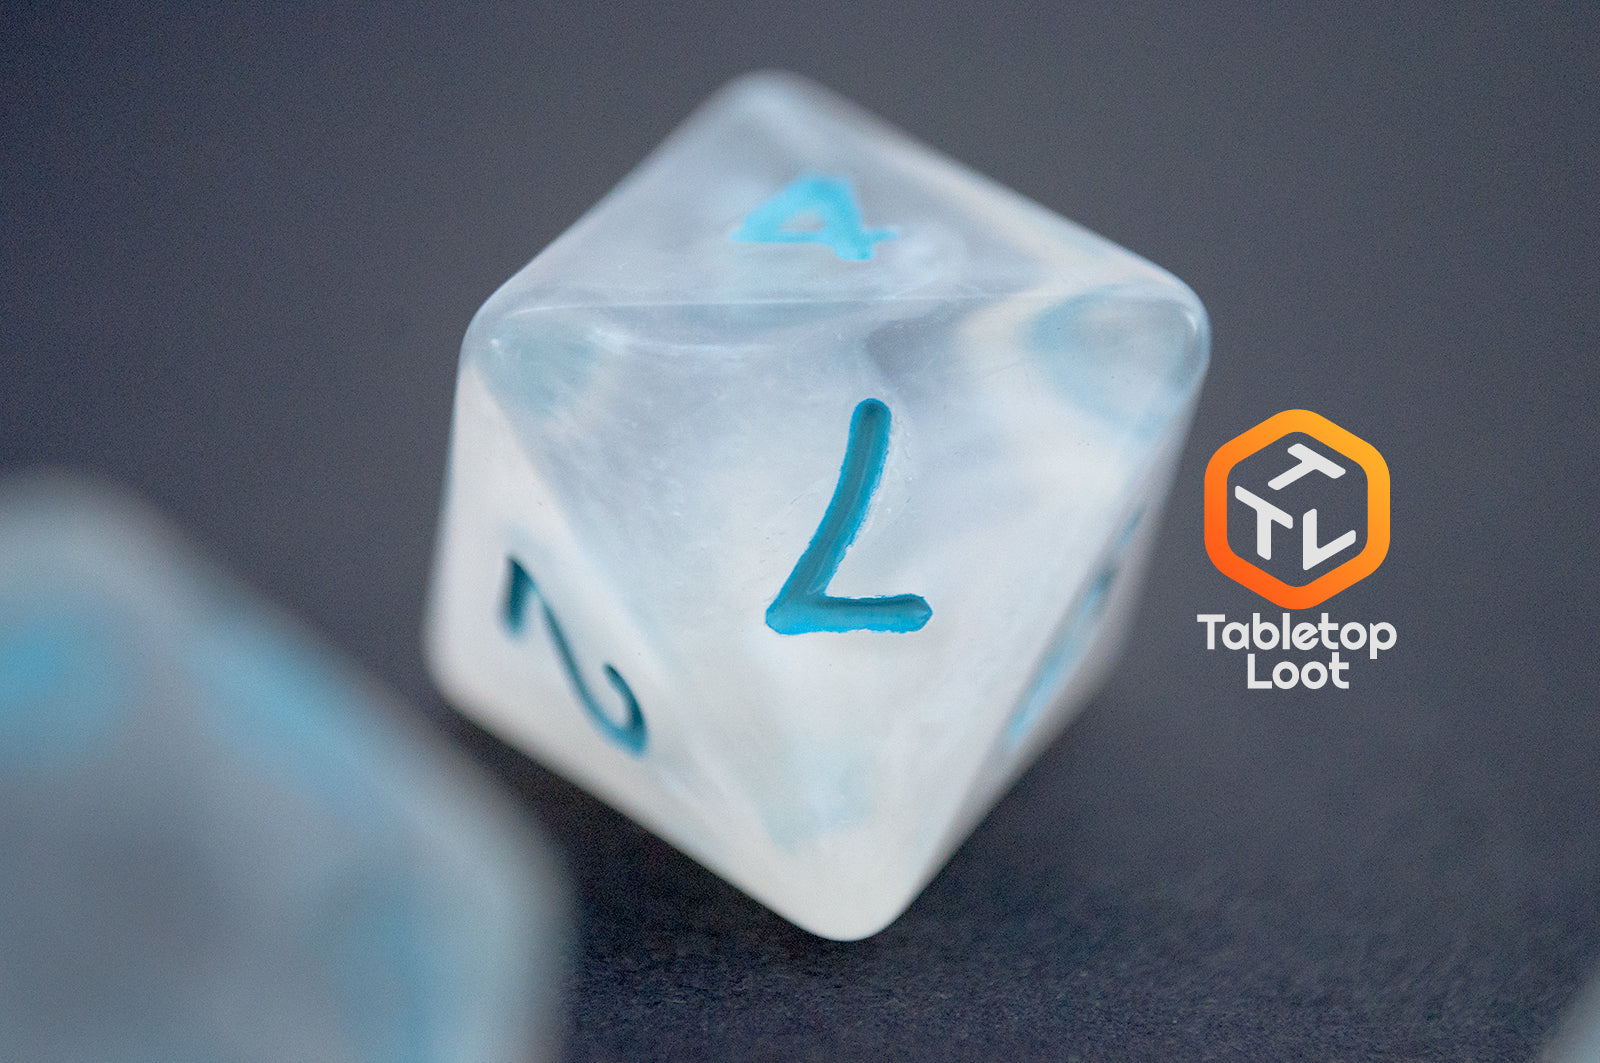 A close up of the D8 from the Dinneshere 7 piece dice set from Tabletop Loot with wispy white swirls and blue numbering.